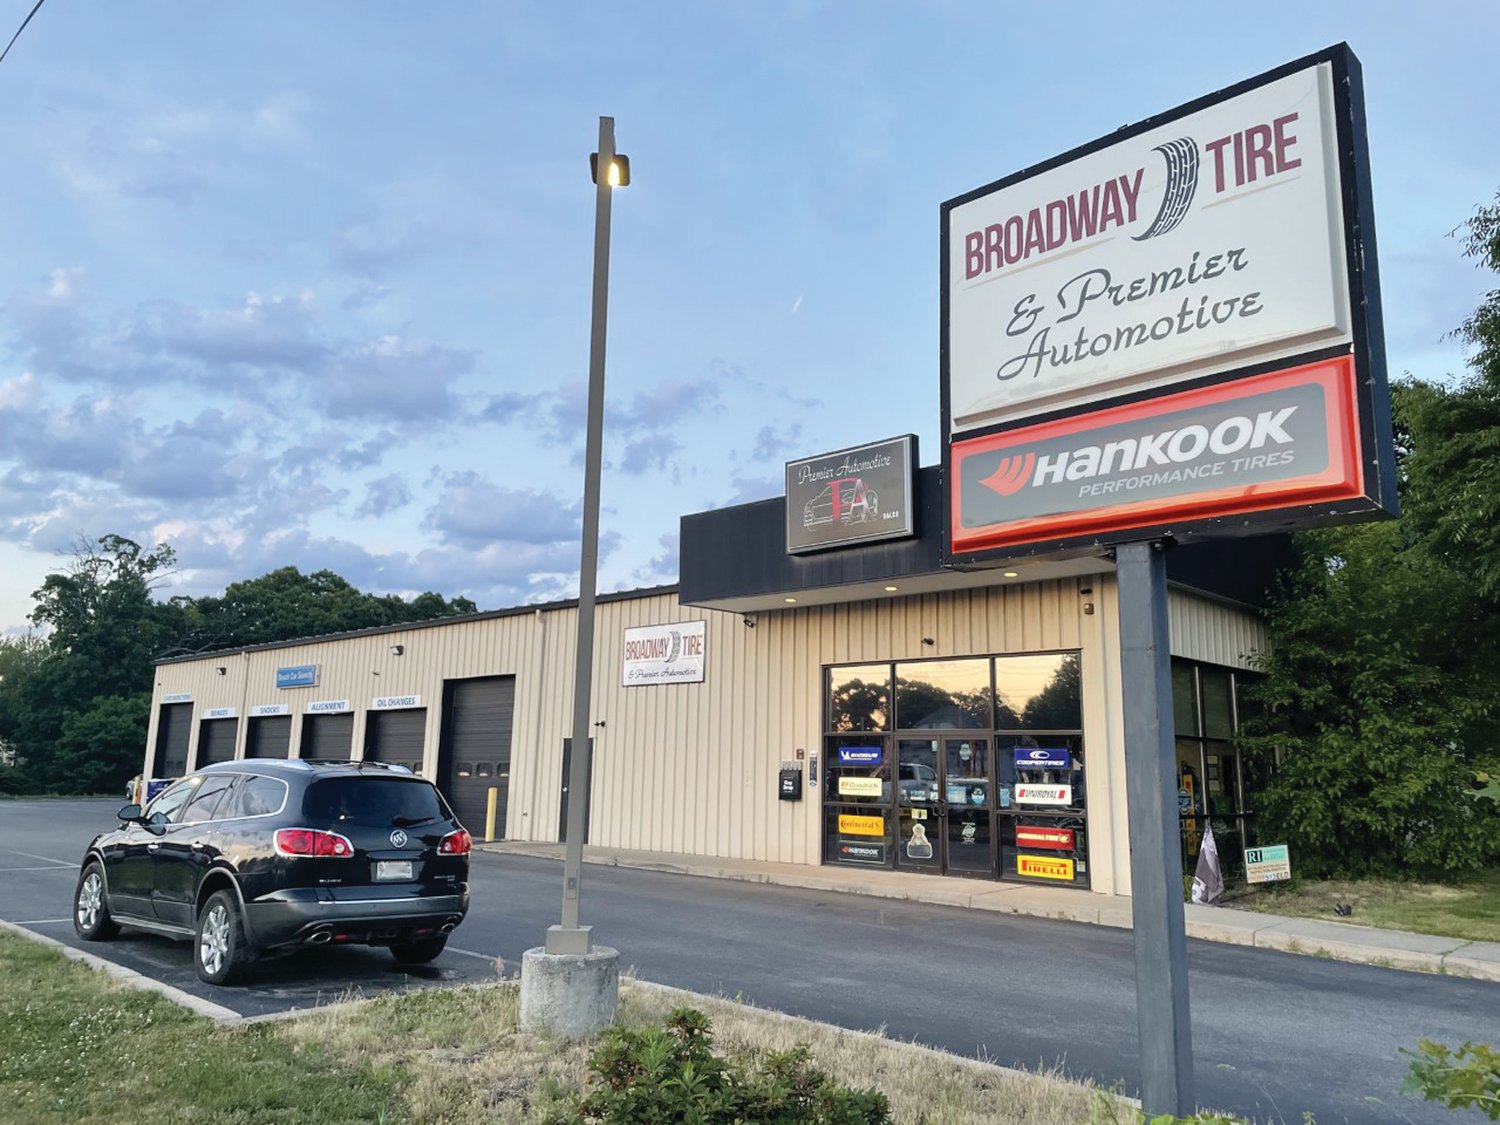 Check out Broadway Tire & Premier Automotive Services on Warwick Avenue for all your repair needs, from state inspections to oil changes and so much more. Call today to keep your vehicle on the road safely this summer!